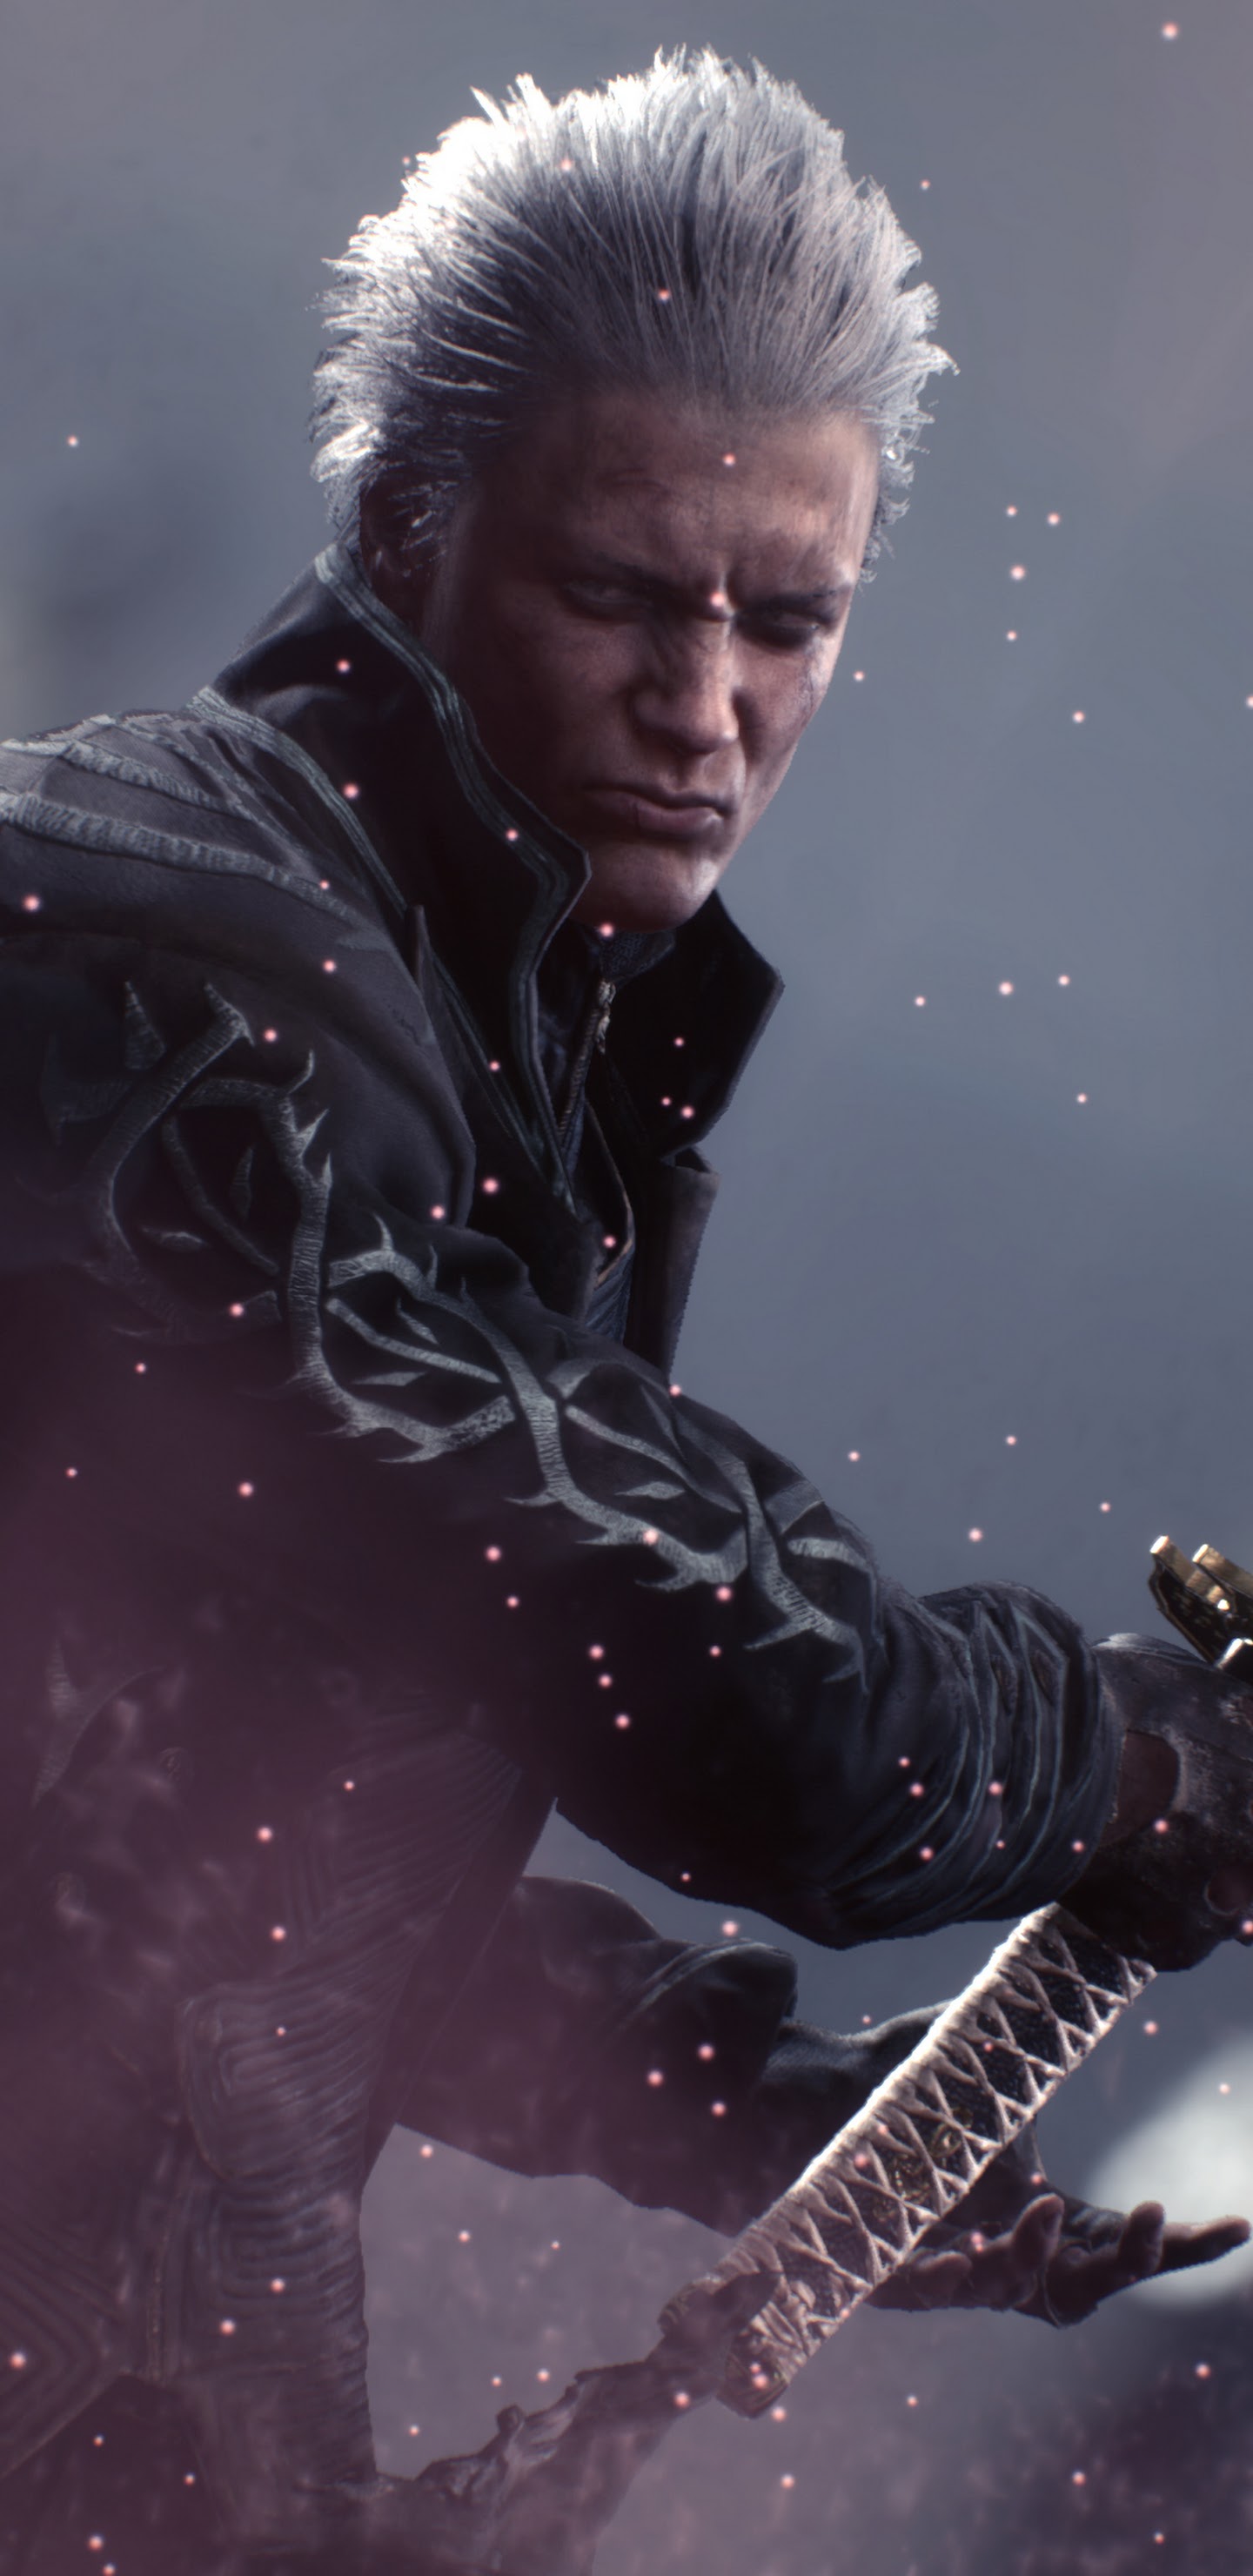 Devil May Cry 5 Dante and Vergil HD phone wallpaper  Pxfuel